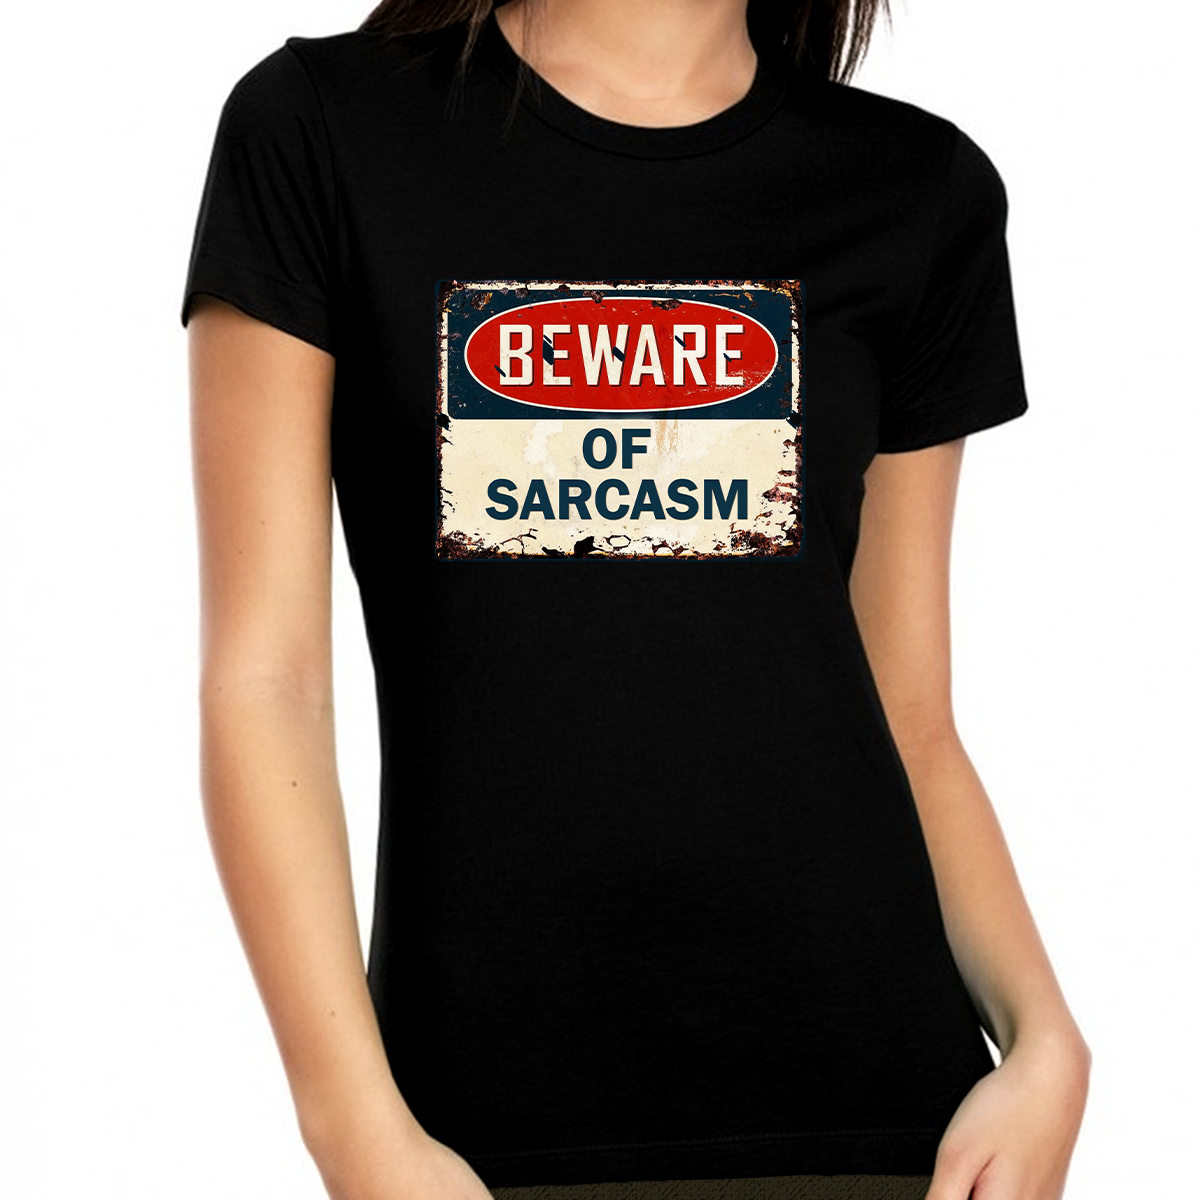 Shirts For Women  Funny outfits, T shirts for women, Sarcastic clothing